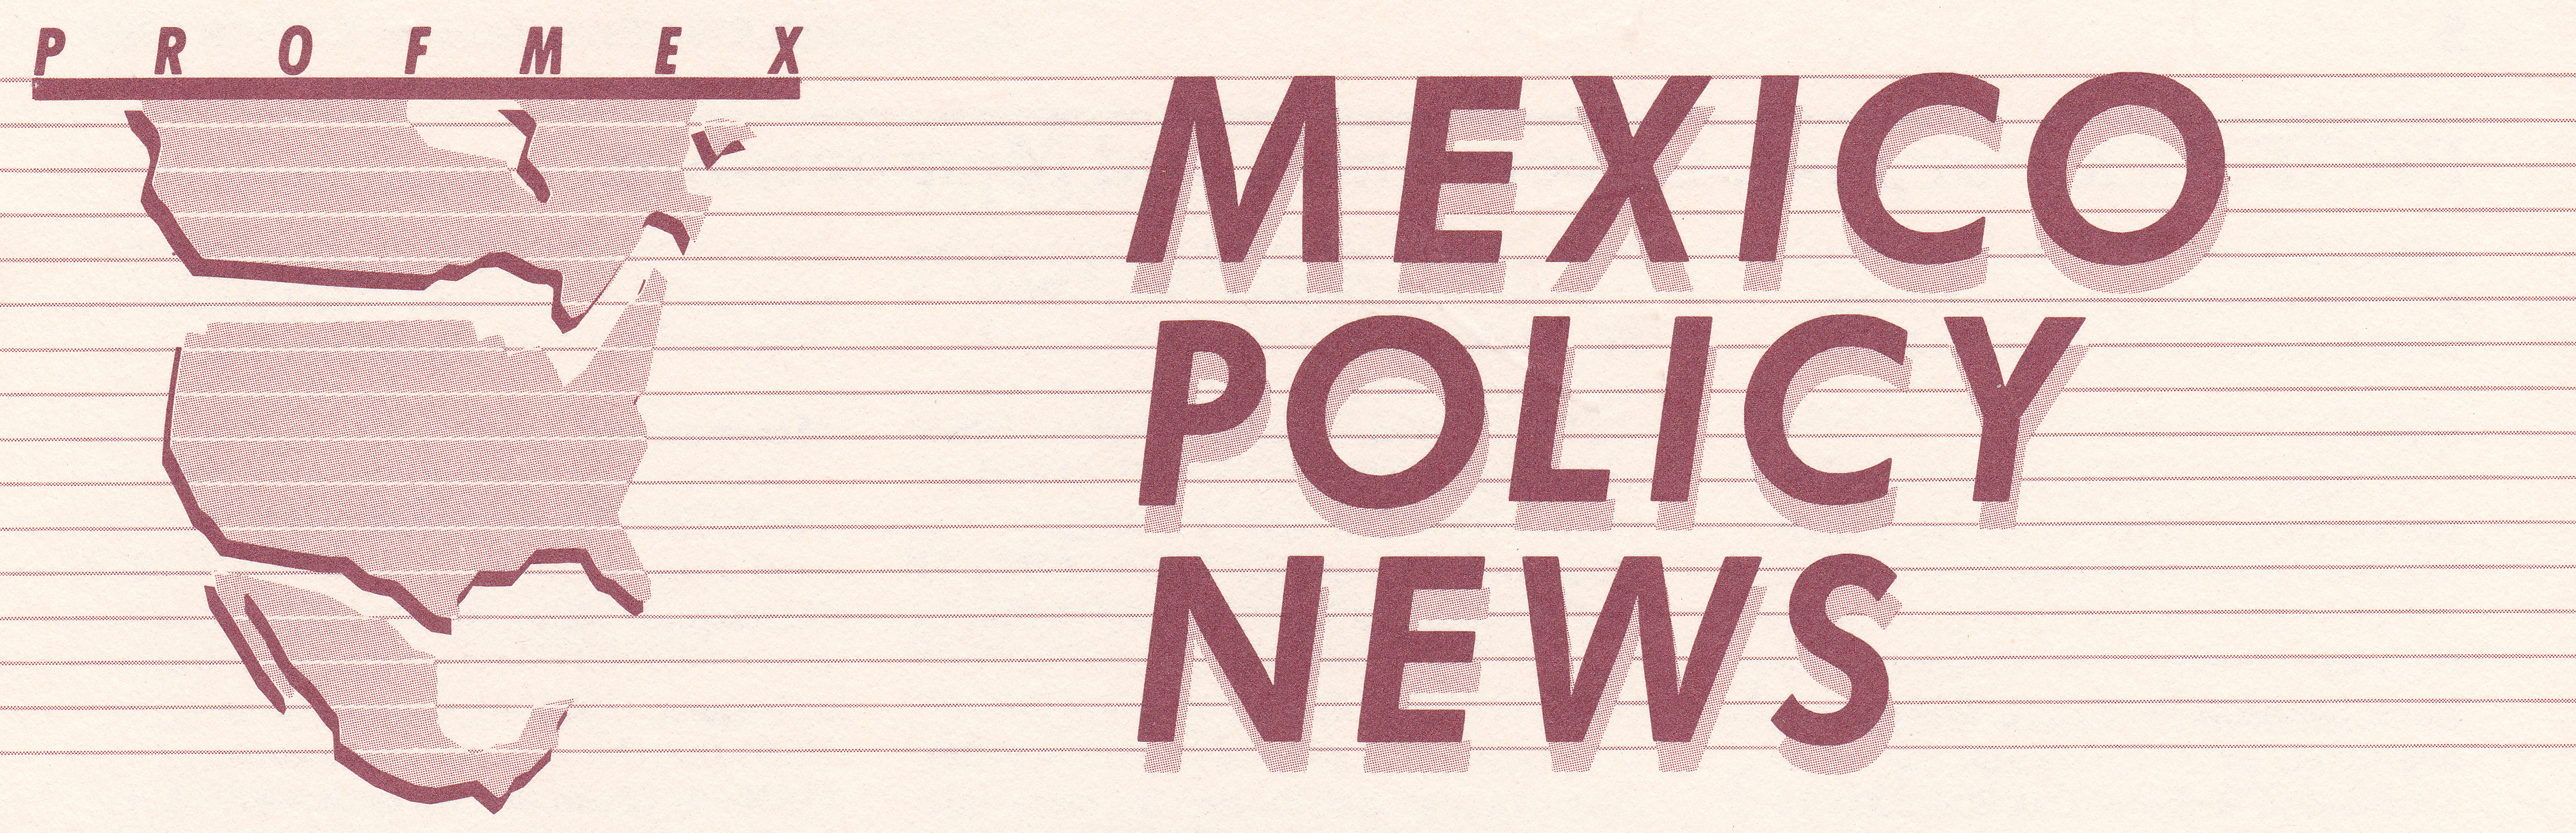 Mexico Policy News